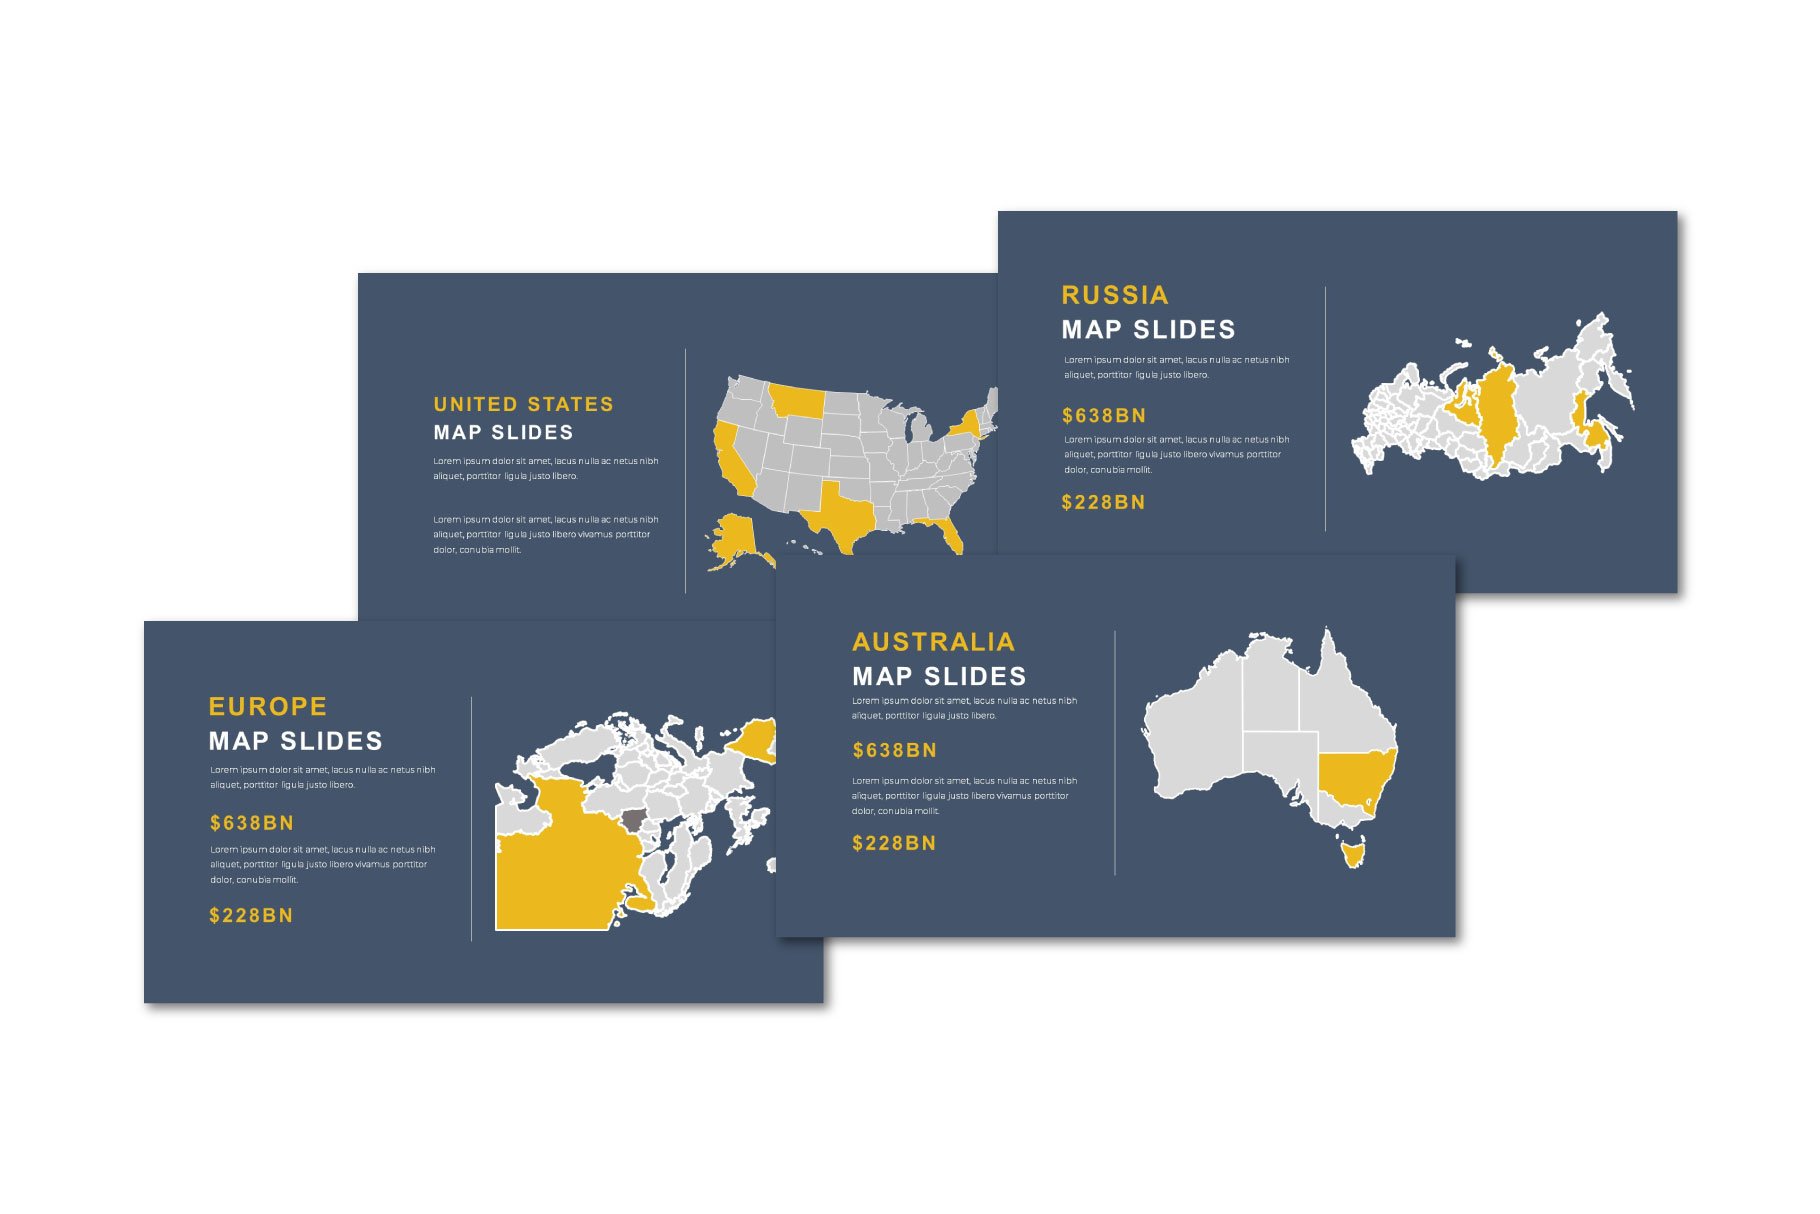 Light grey map with yellow points on a matte grey background. Nice colors mix.